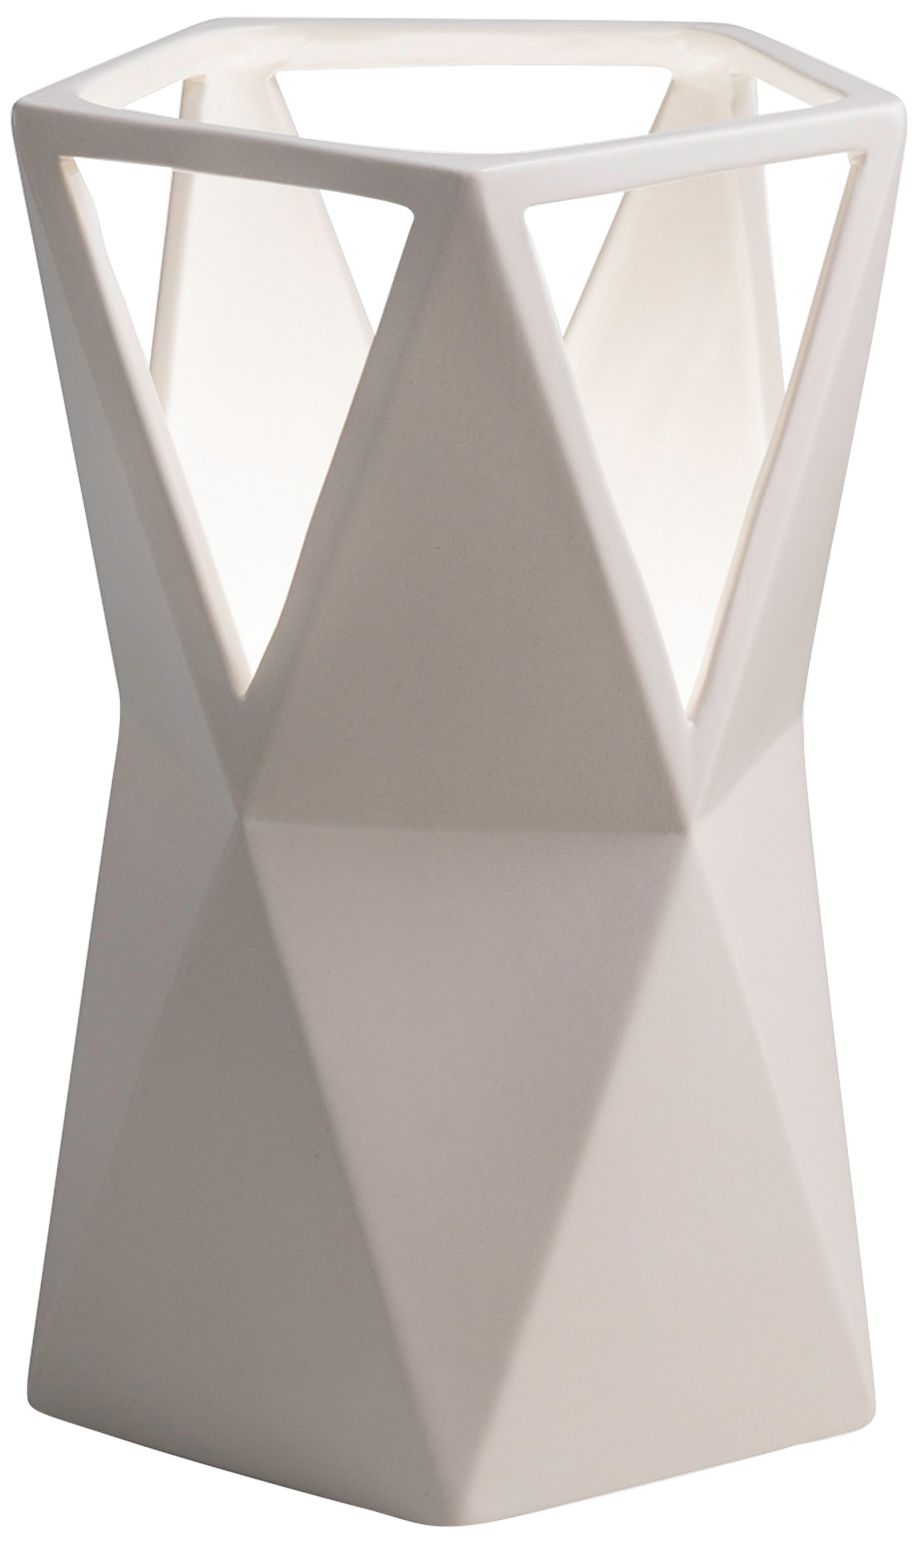 Totem 11 3/4" High Matte White Ceramic Portable Accent Table Lamp